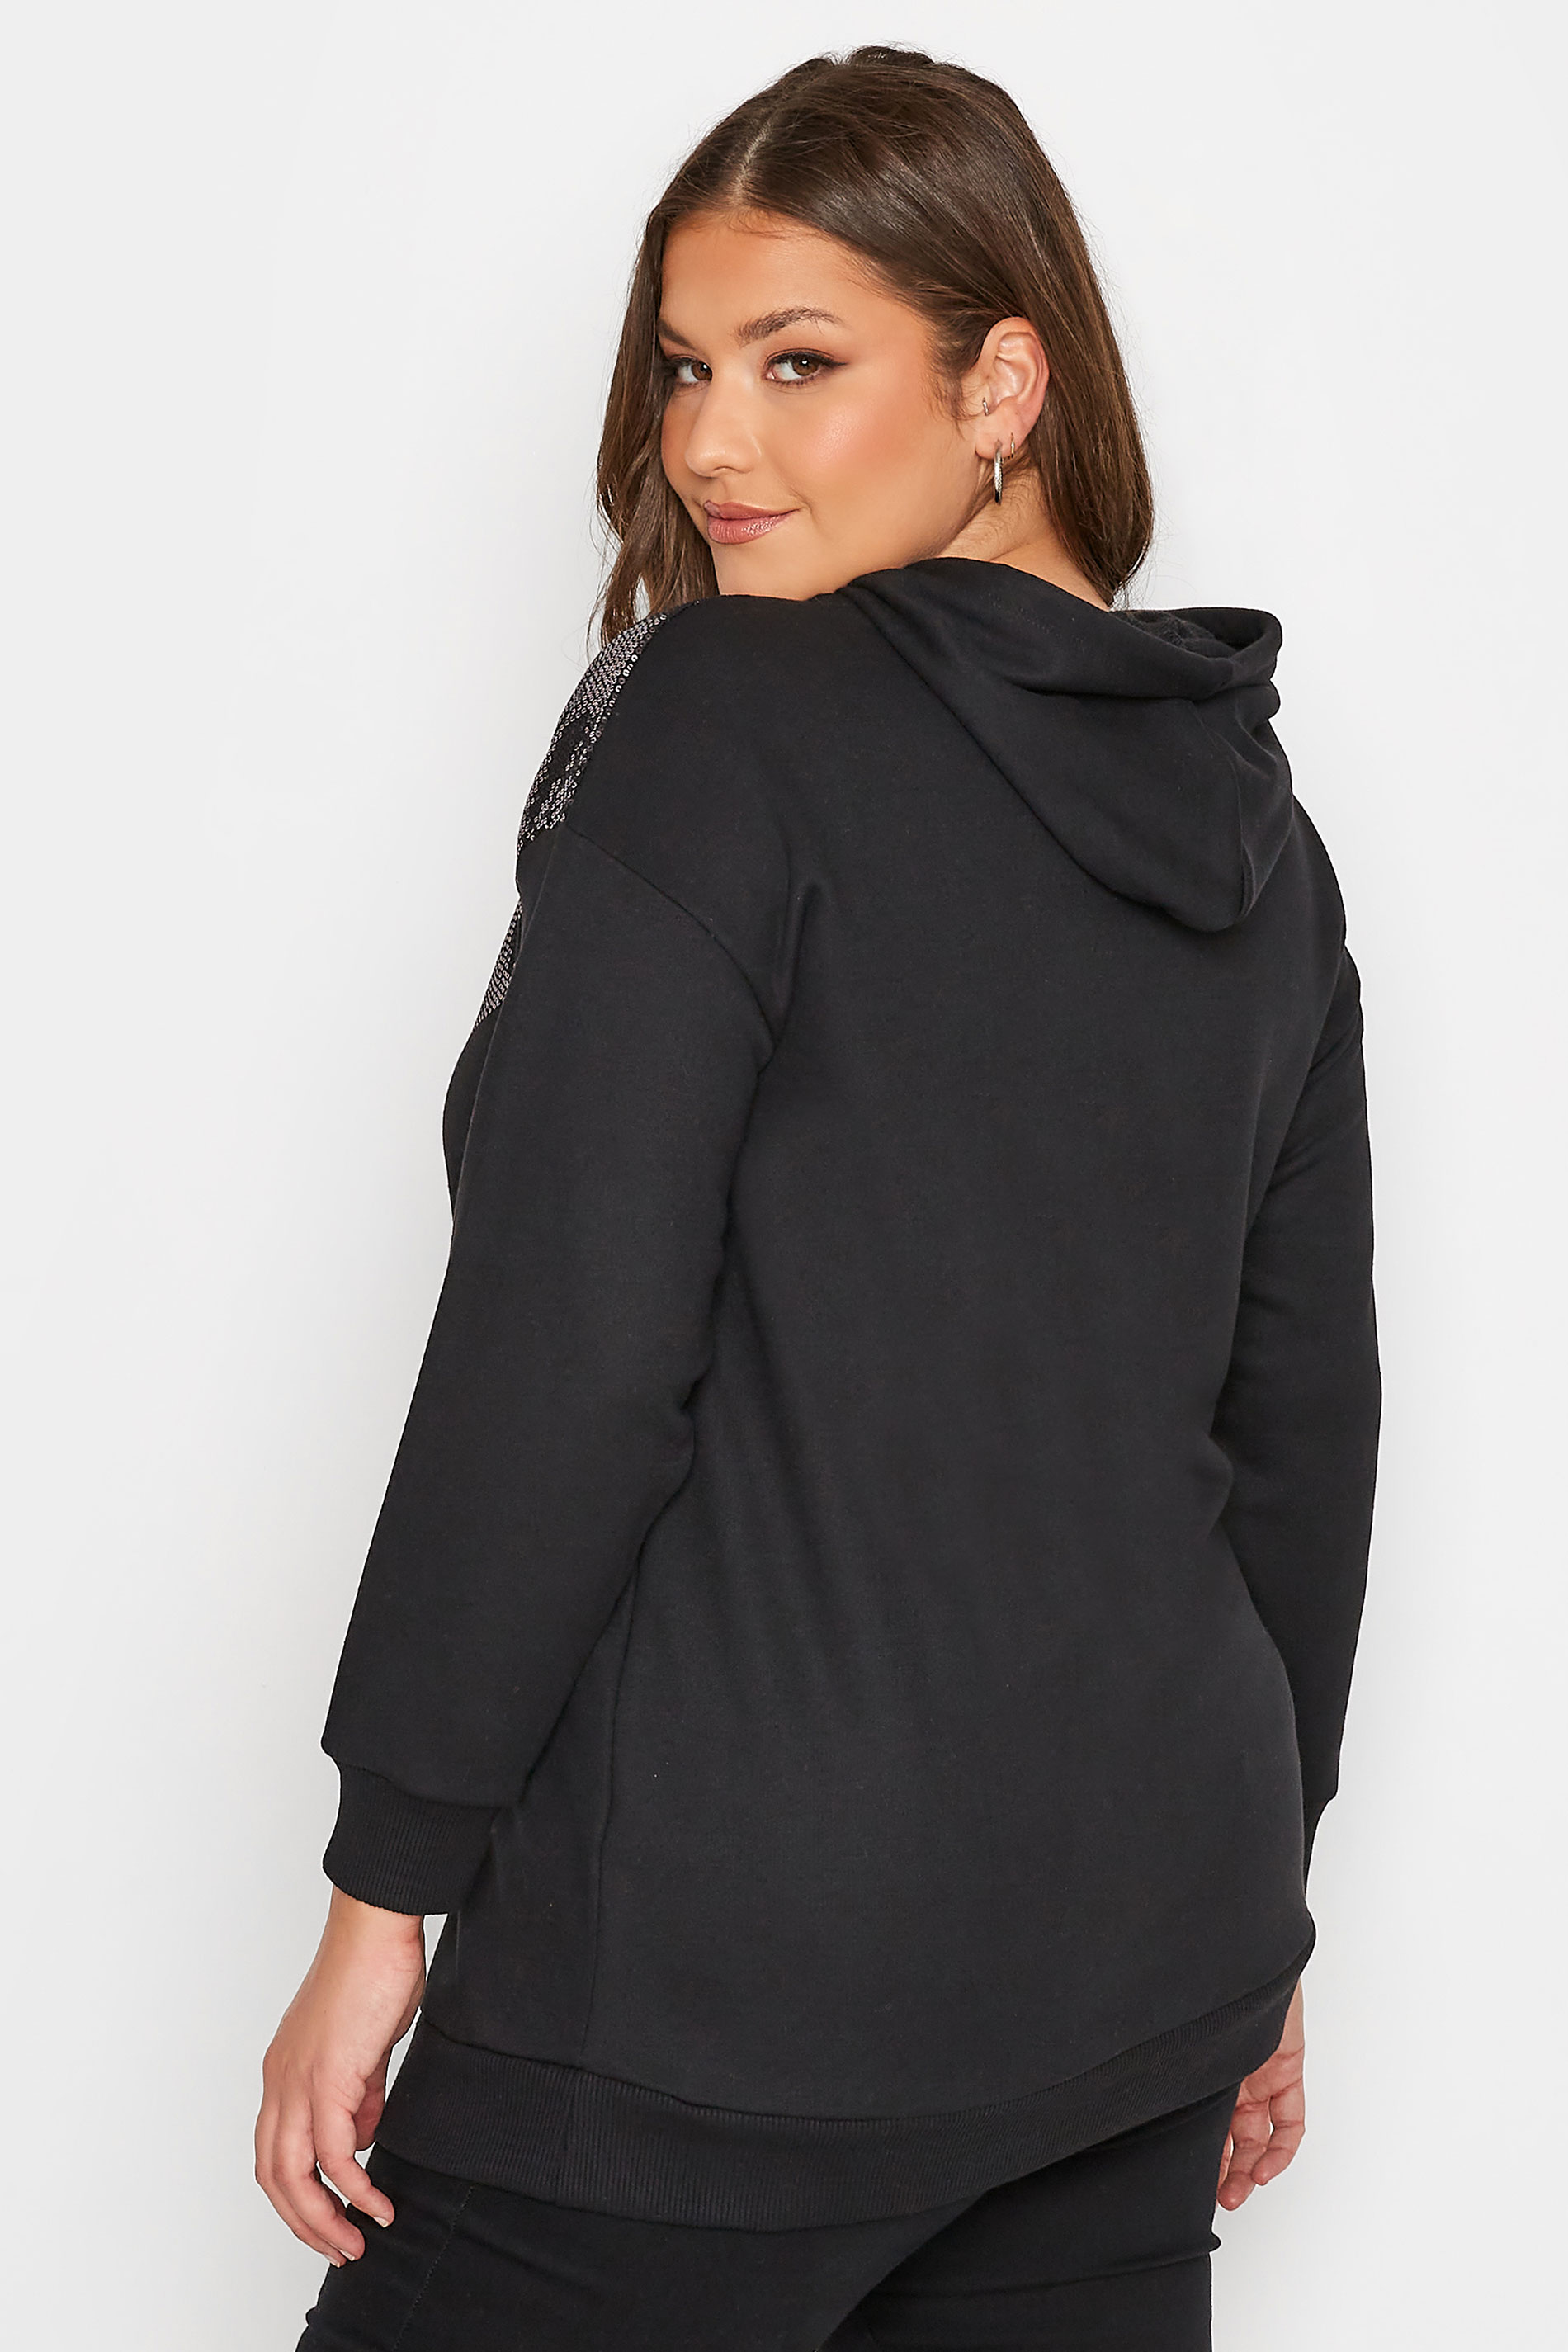 Plus Size Black Sequin Hoodie | Yours Clothing 3